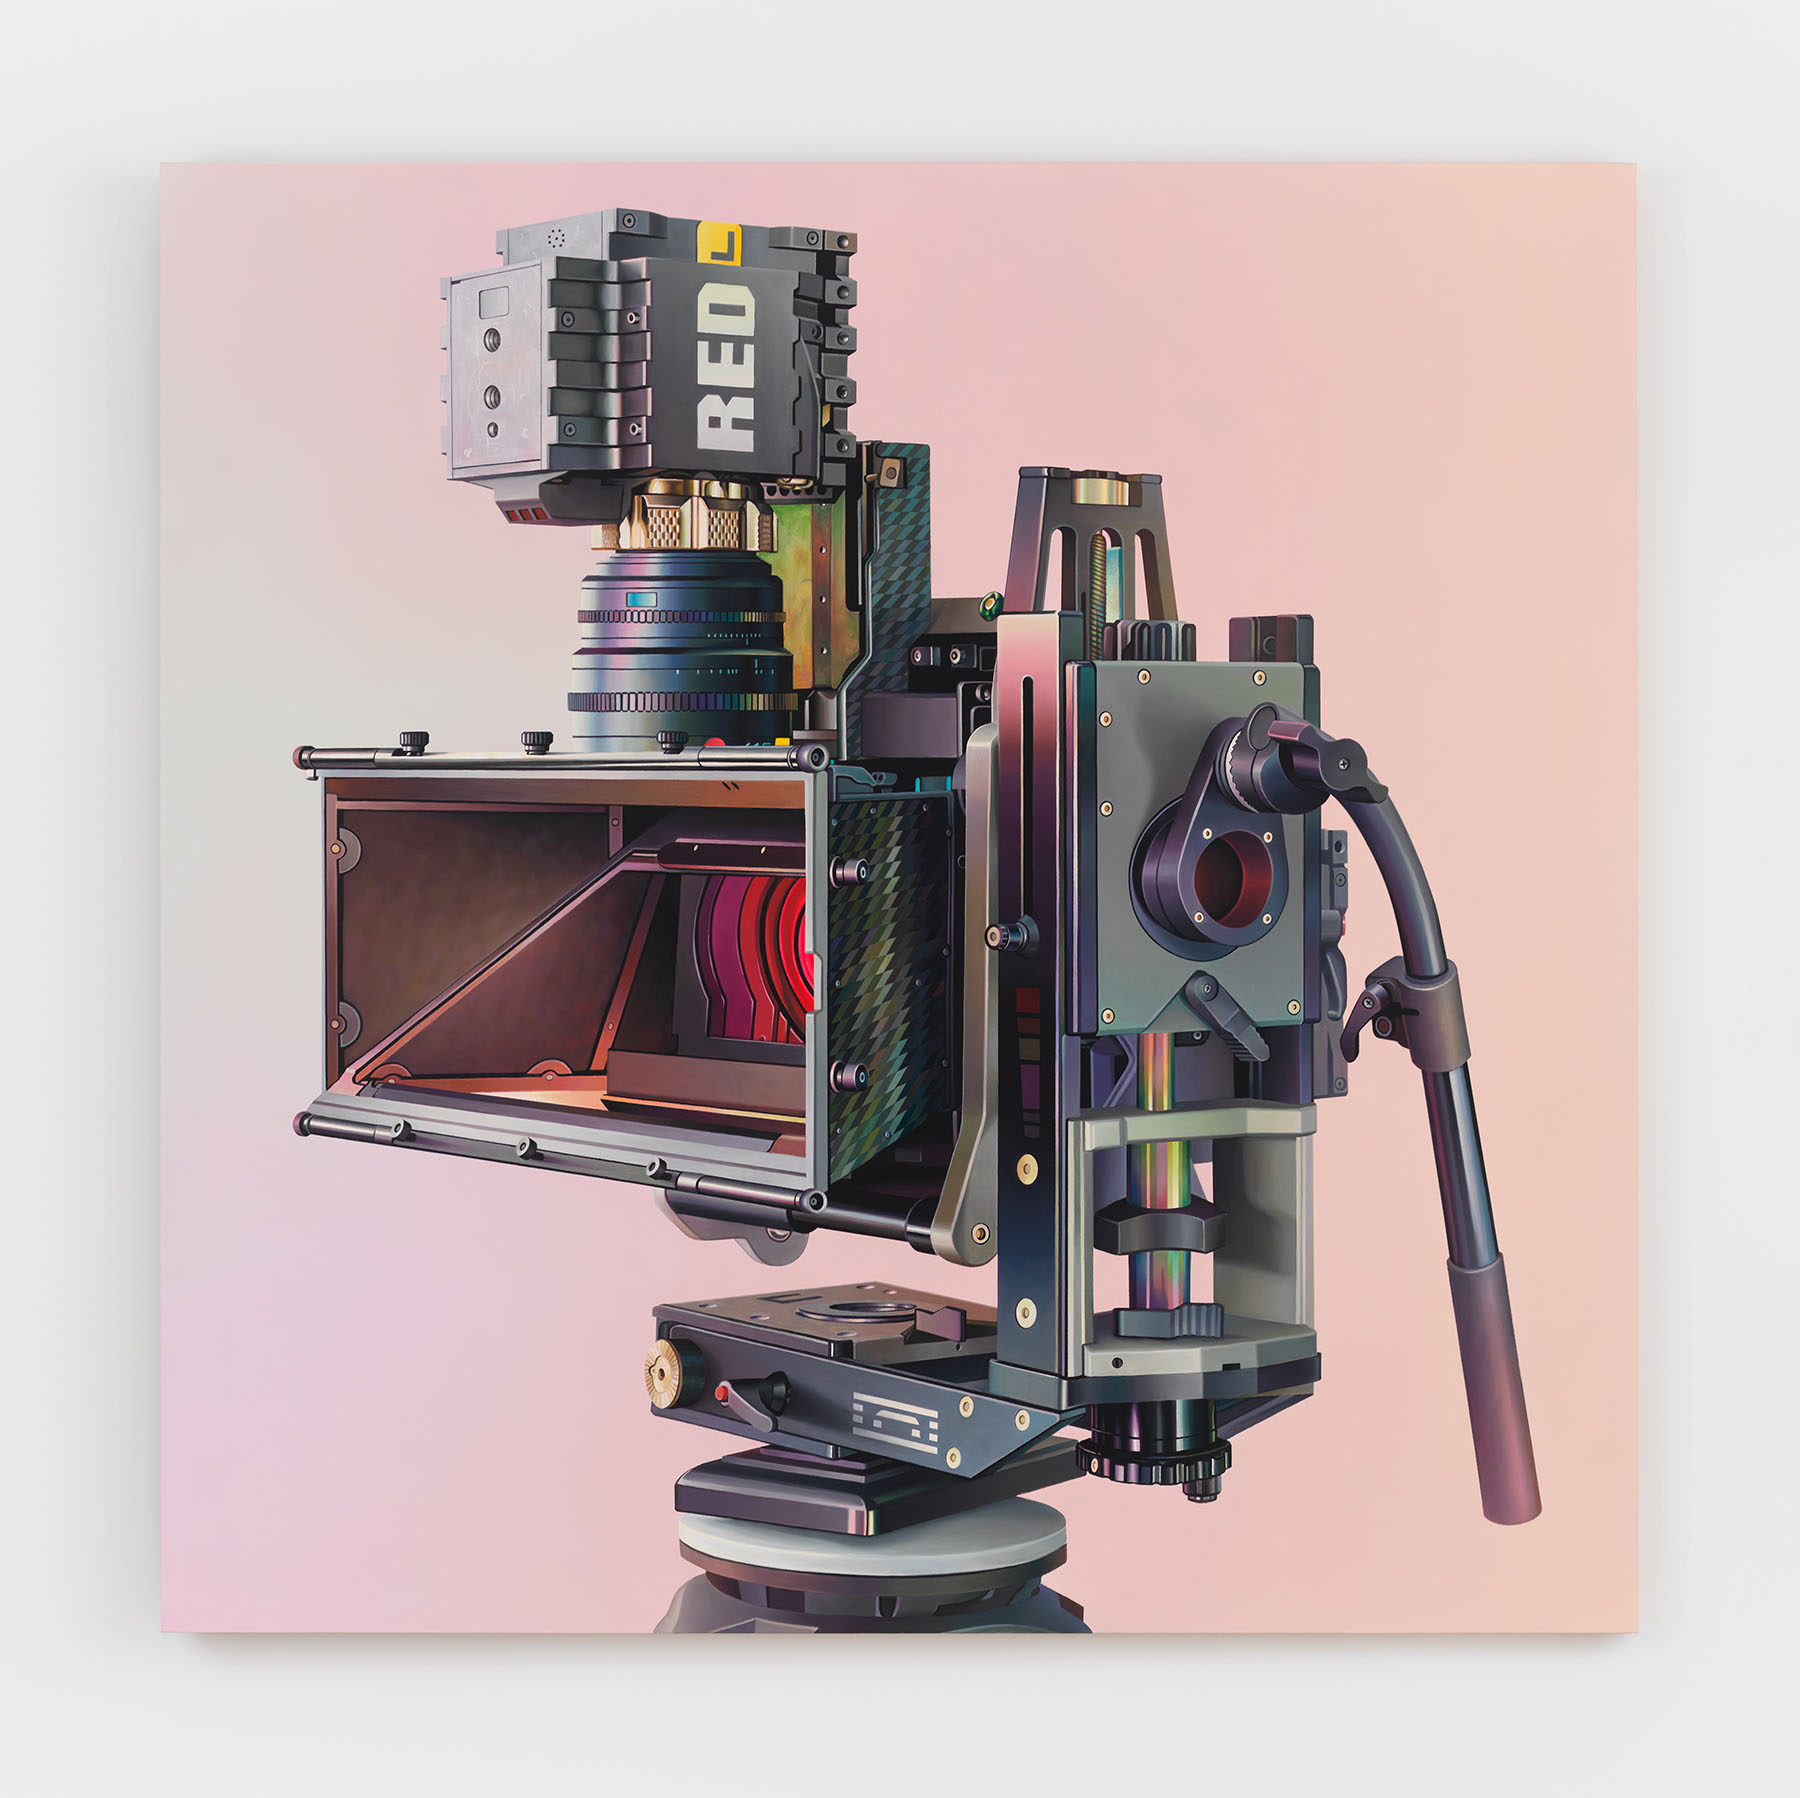 Chason Matthams, Untitled (RED, 3D rig - tripod), 2021, Oil on panel, 54 x 54 in.